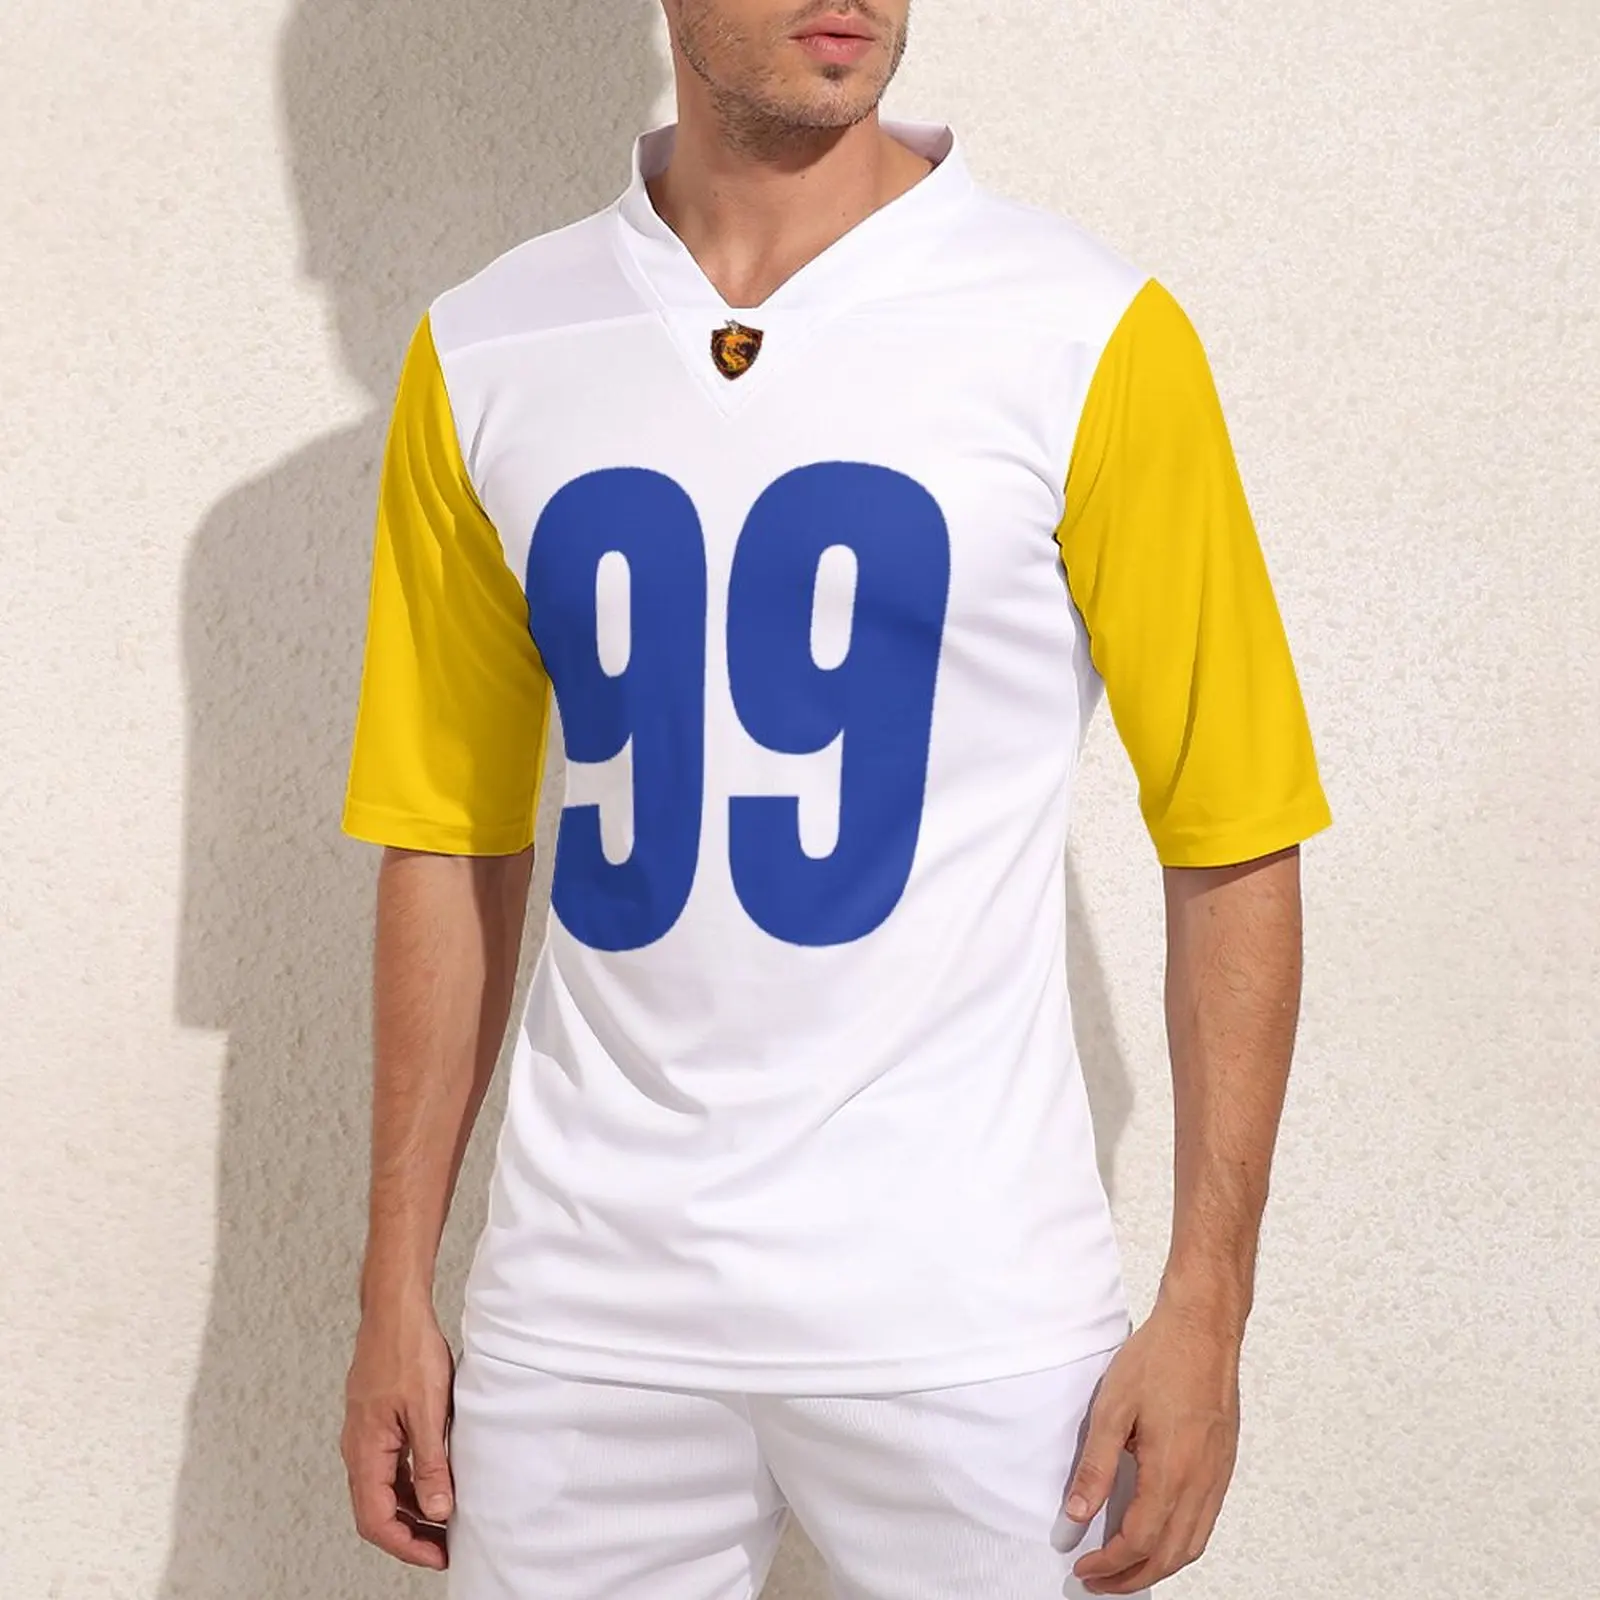 Your Design Los Angeles No 99 Football Jerseys Male Fashion Rugby Jersey Personalization Workout Football Shirt